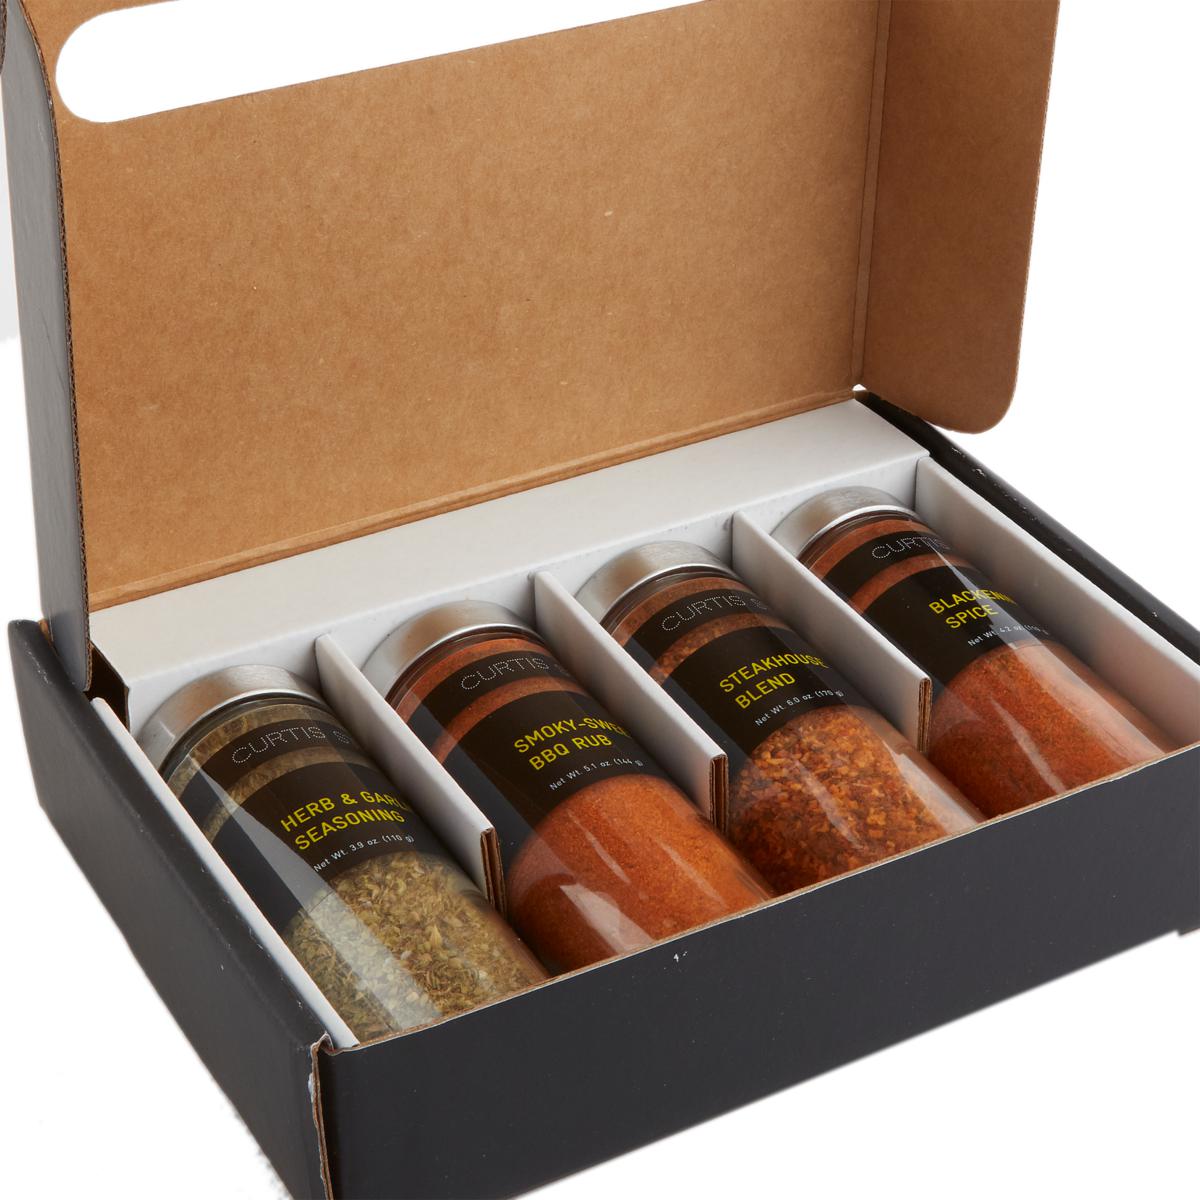 Curtis Stone 4-Pack Spice Jars with Lids Open Box